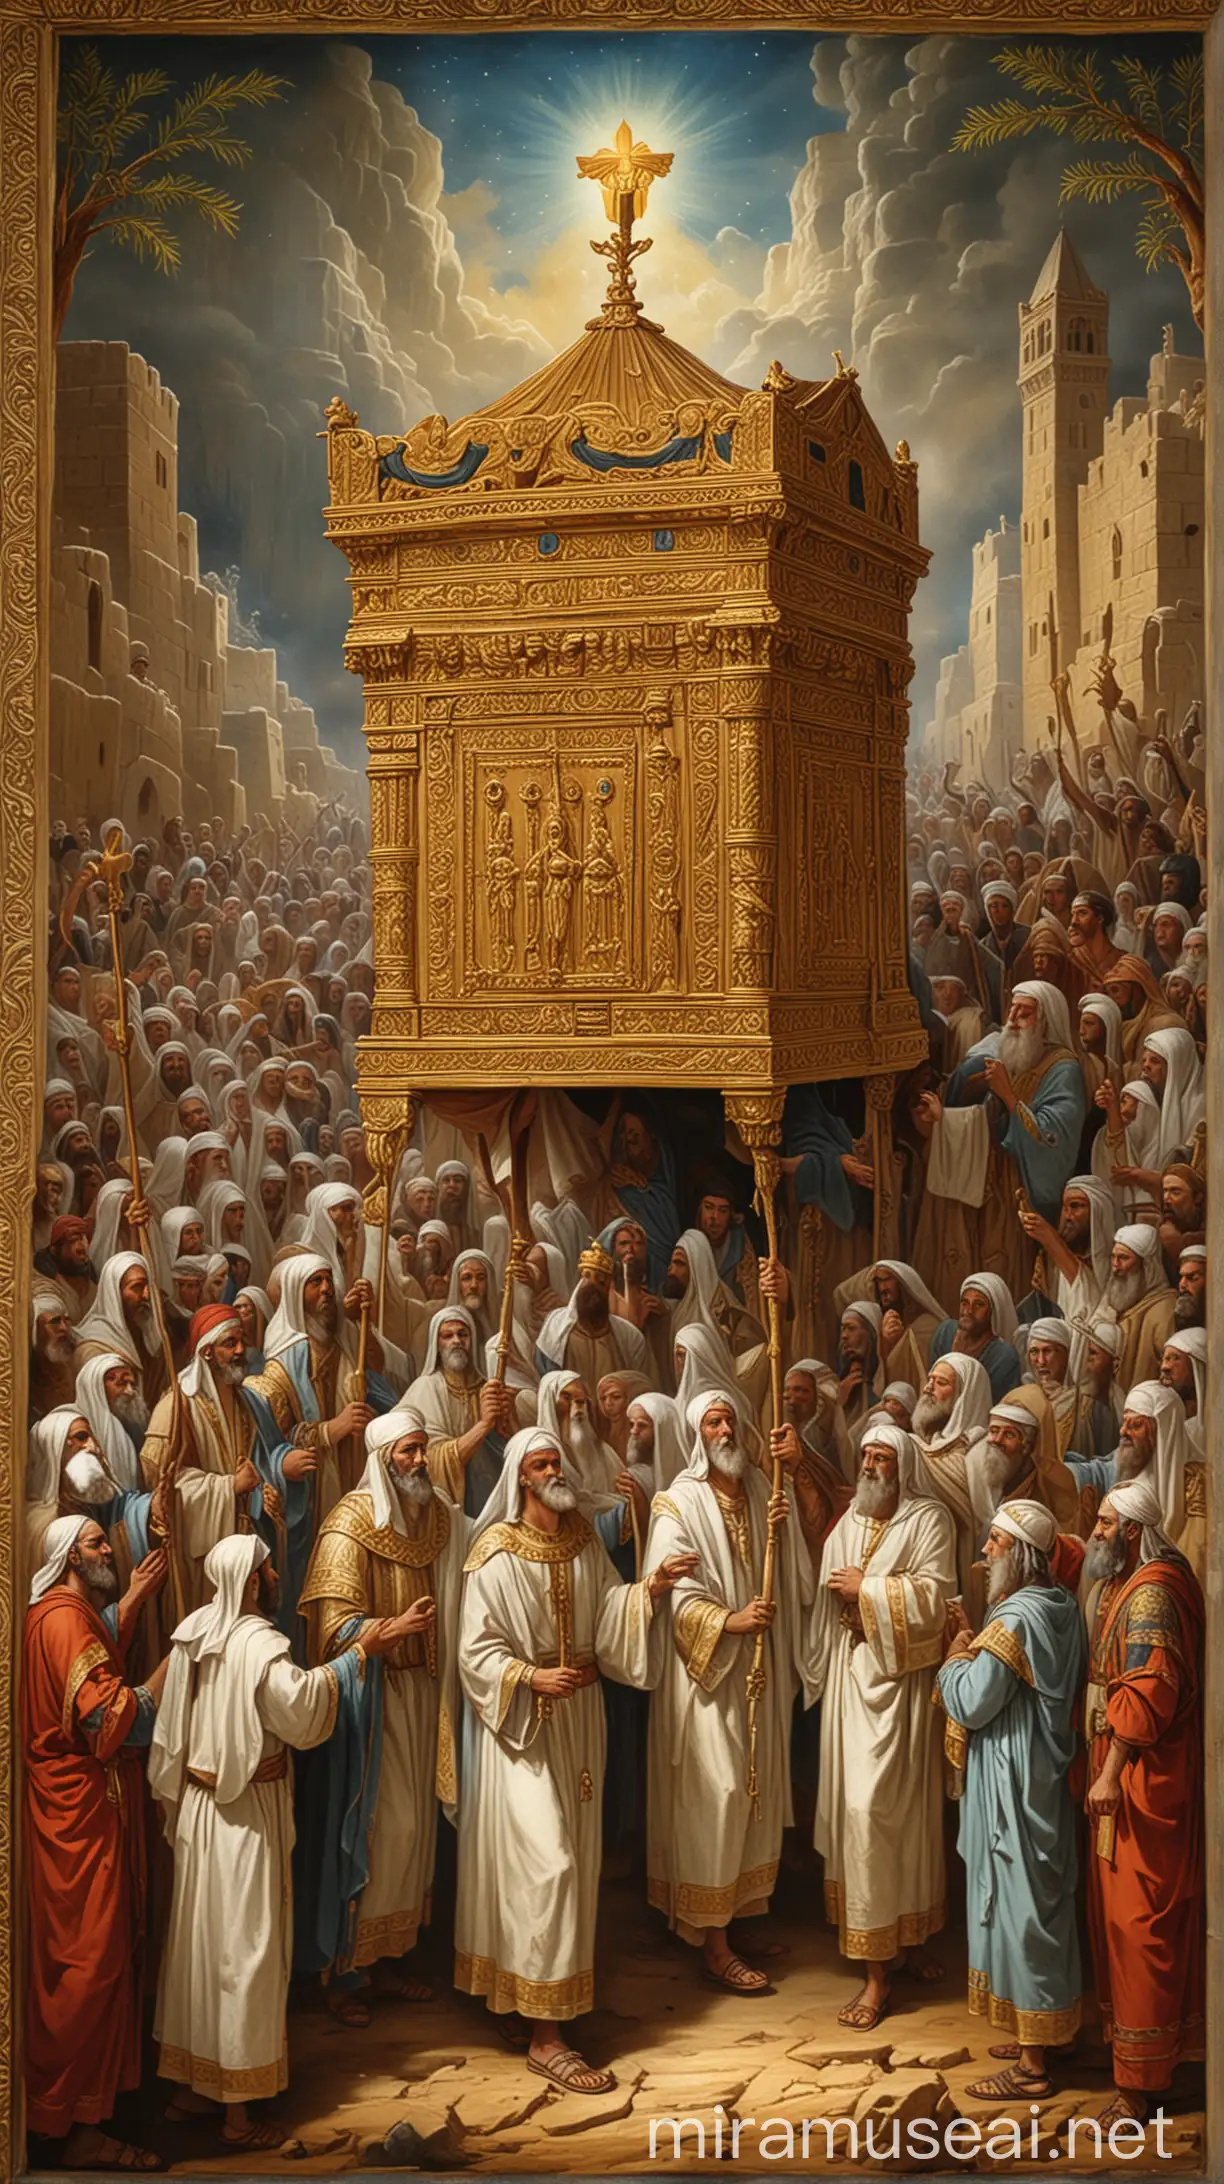 King David Leads Ornate Ark of the Covenant Procession